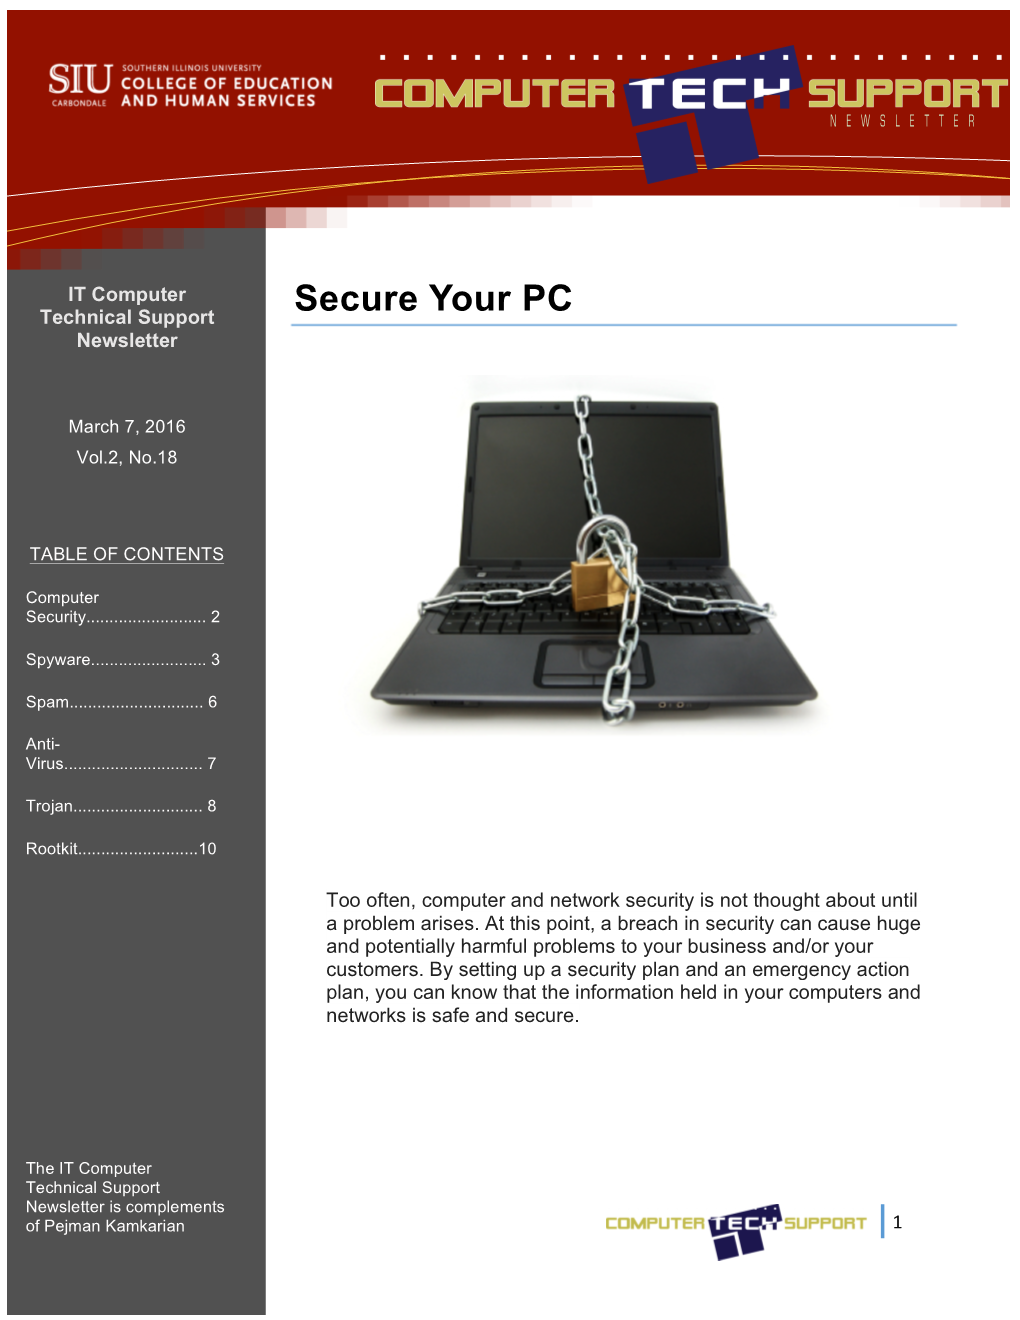 Secure Your PC Newsletter